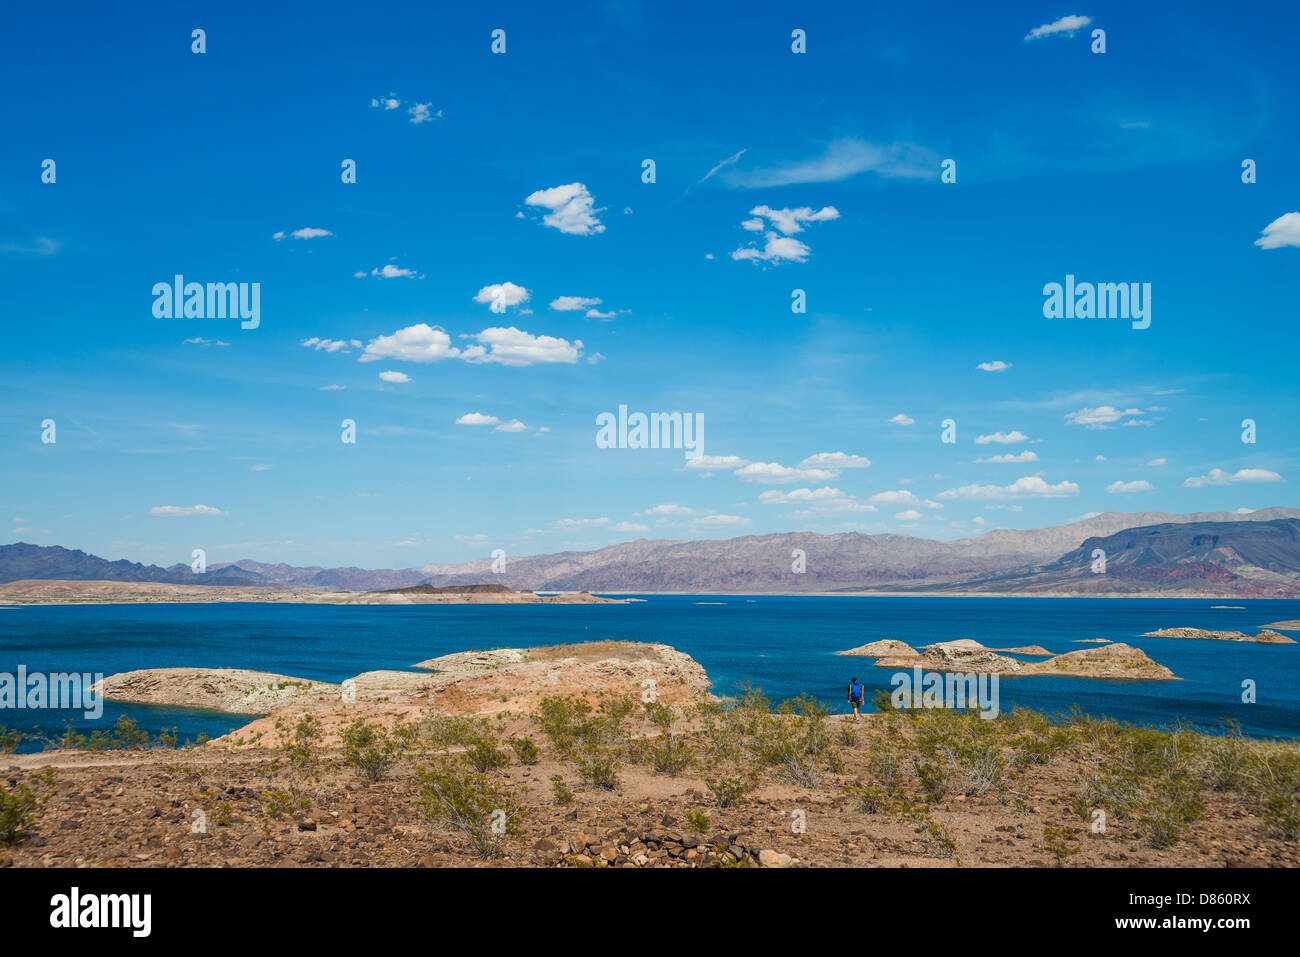 This is an image of Lake Mead, Nevada. Stock Photo